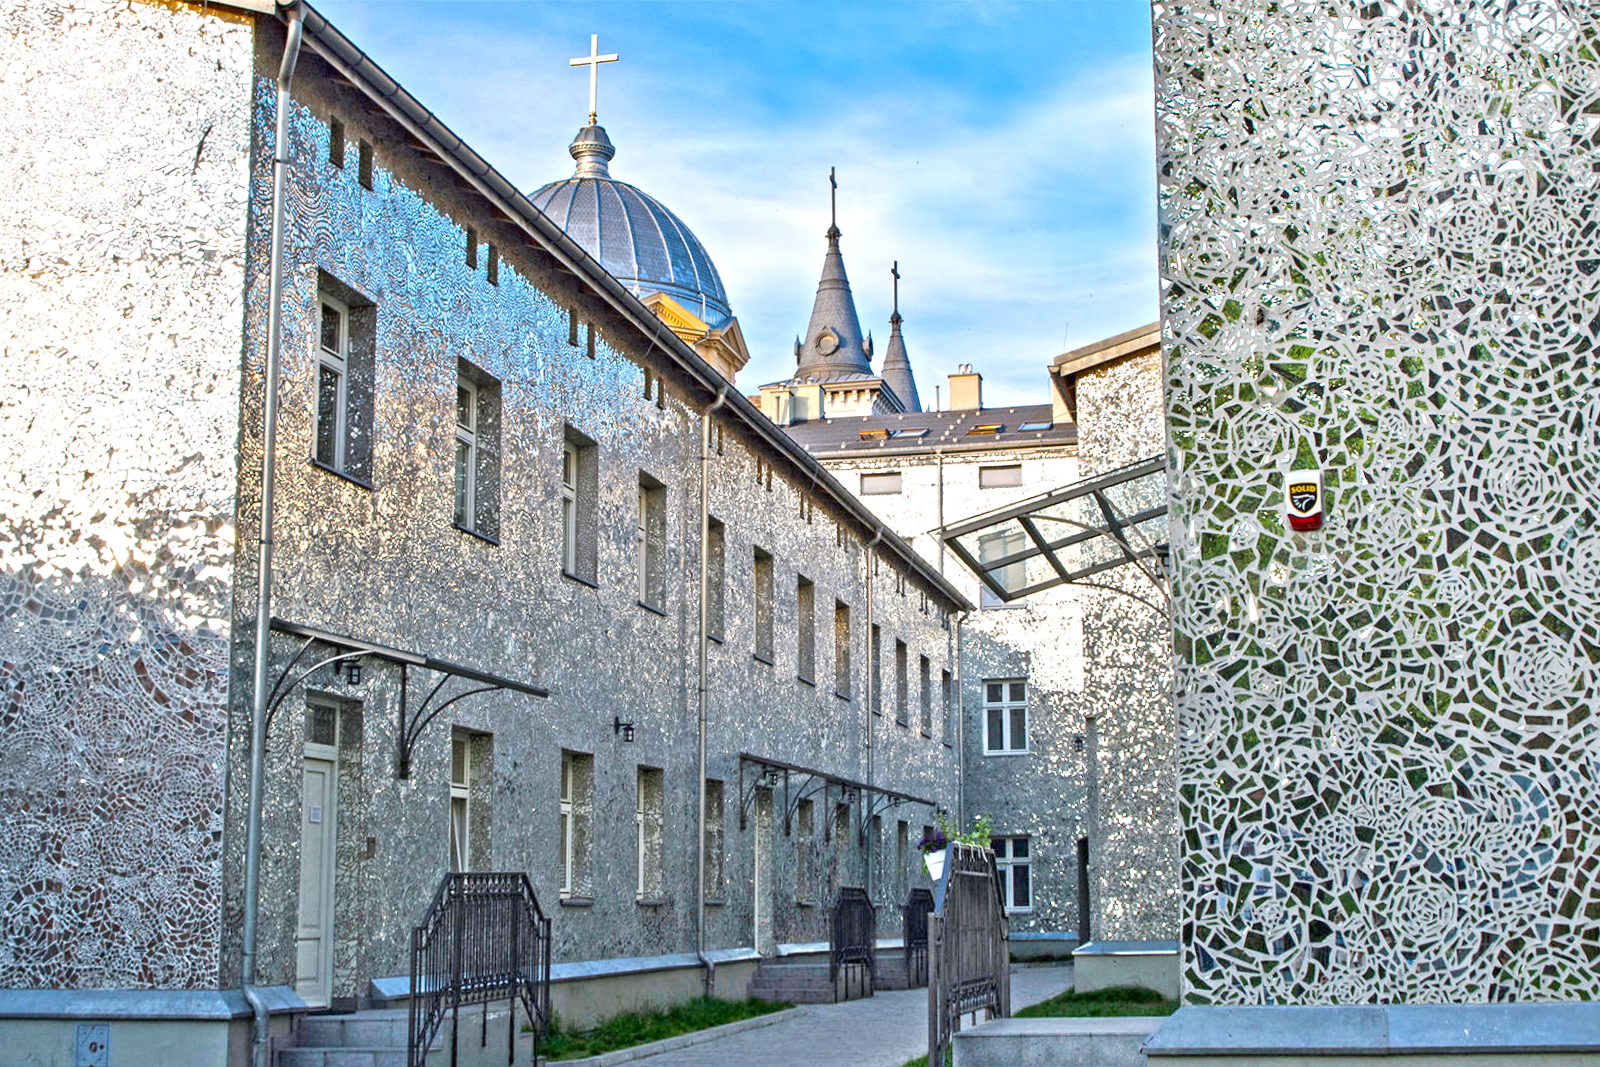 Psaz Rozy in Lodz - a courtyard filled with beautiful mosaics